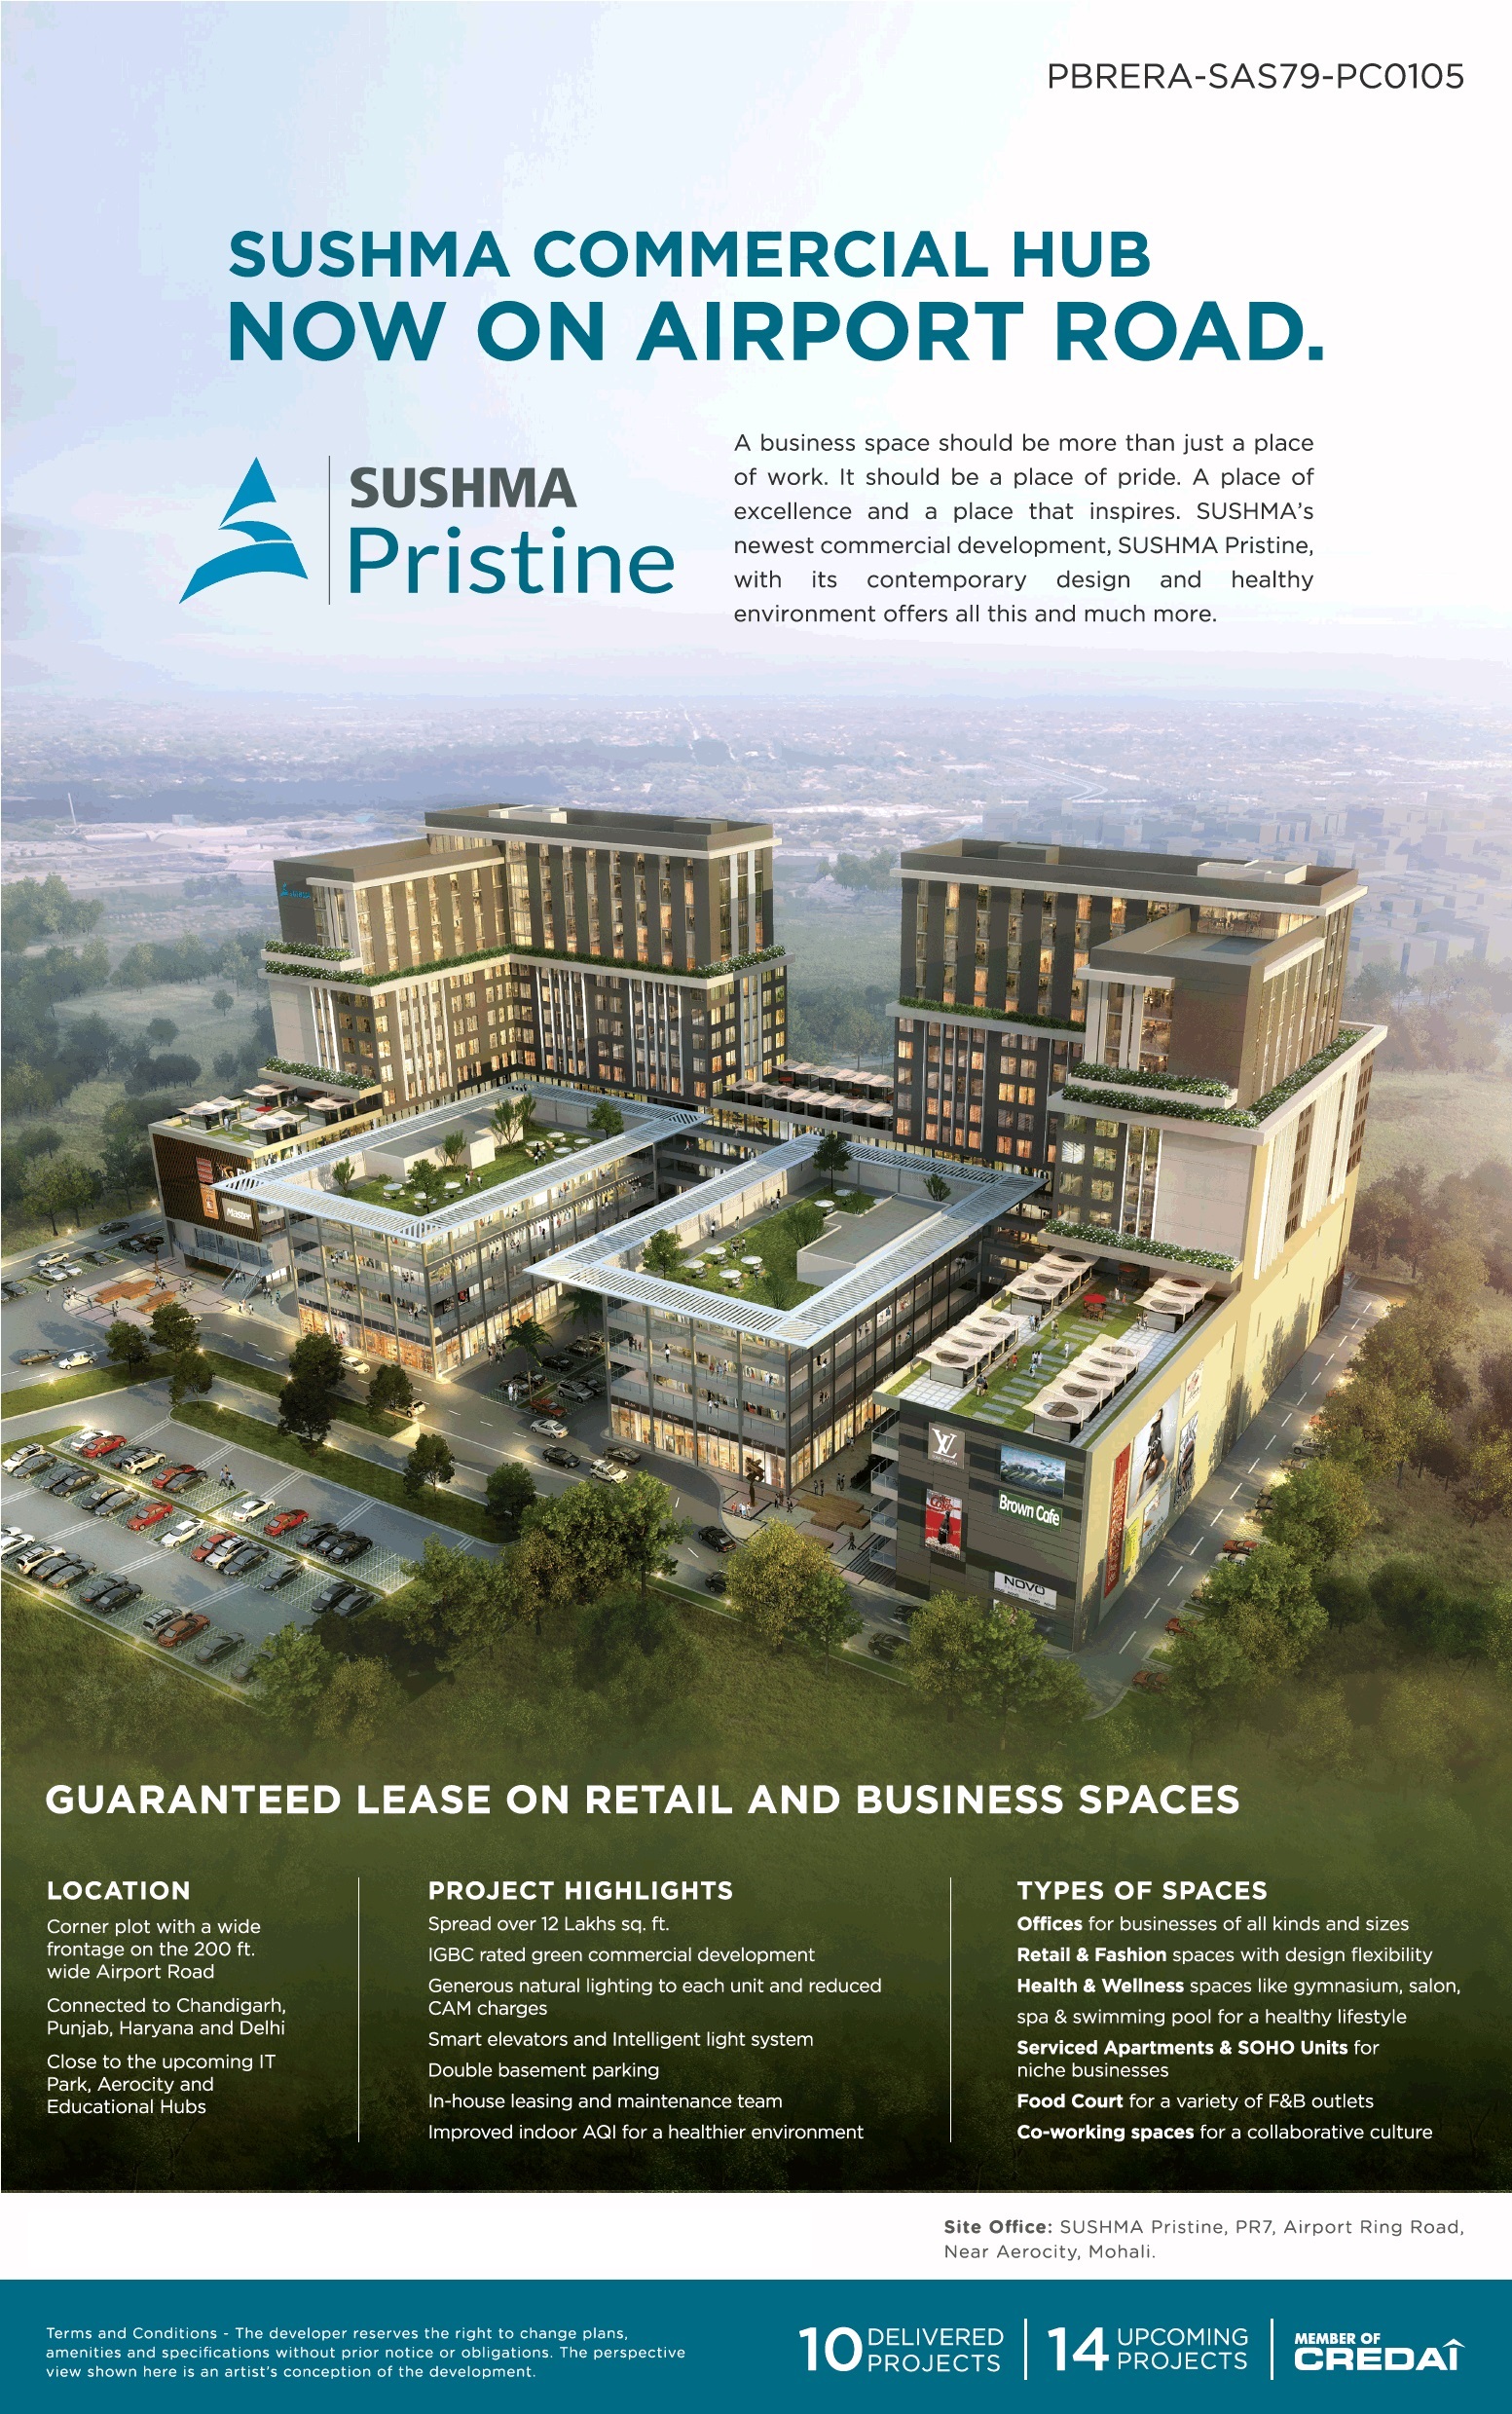 Guaranteed lease on retail and business spaces at Sushma Pristine in Airport Road, Zirakpur Update